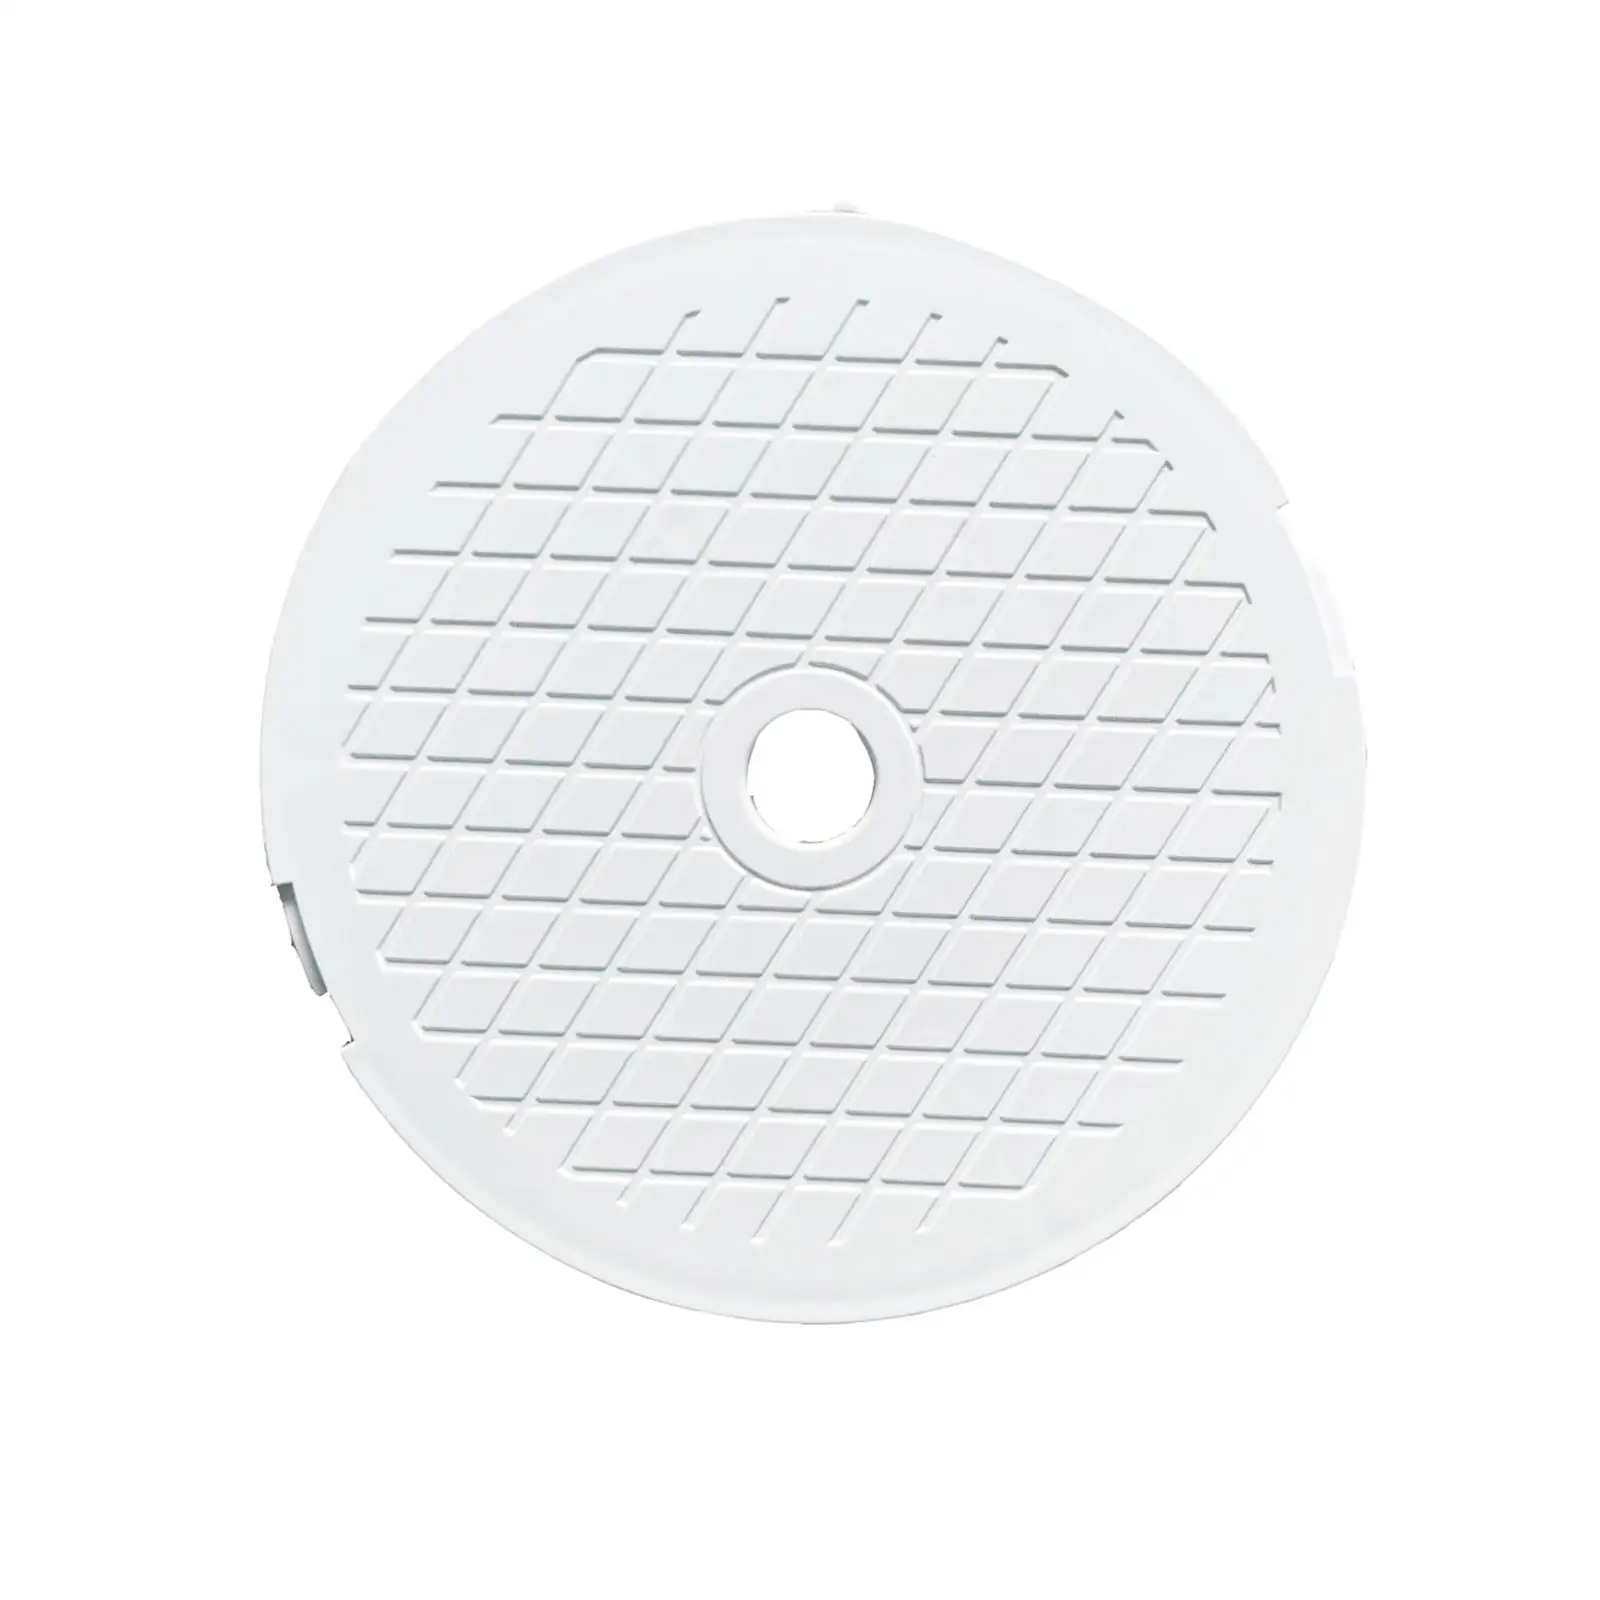 Skimmer Cover Swimming Pool Accessories Round 7.68inch Diamter Skimmer Lid for Spx1096 Skimmer above Ground Pool in Ground Pool